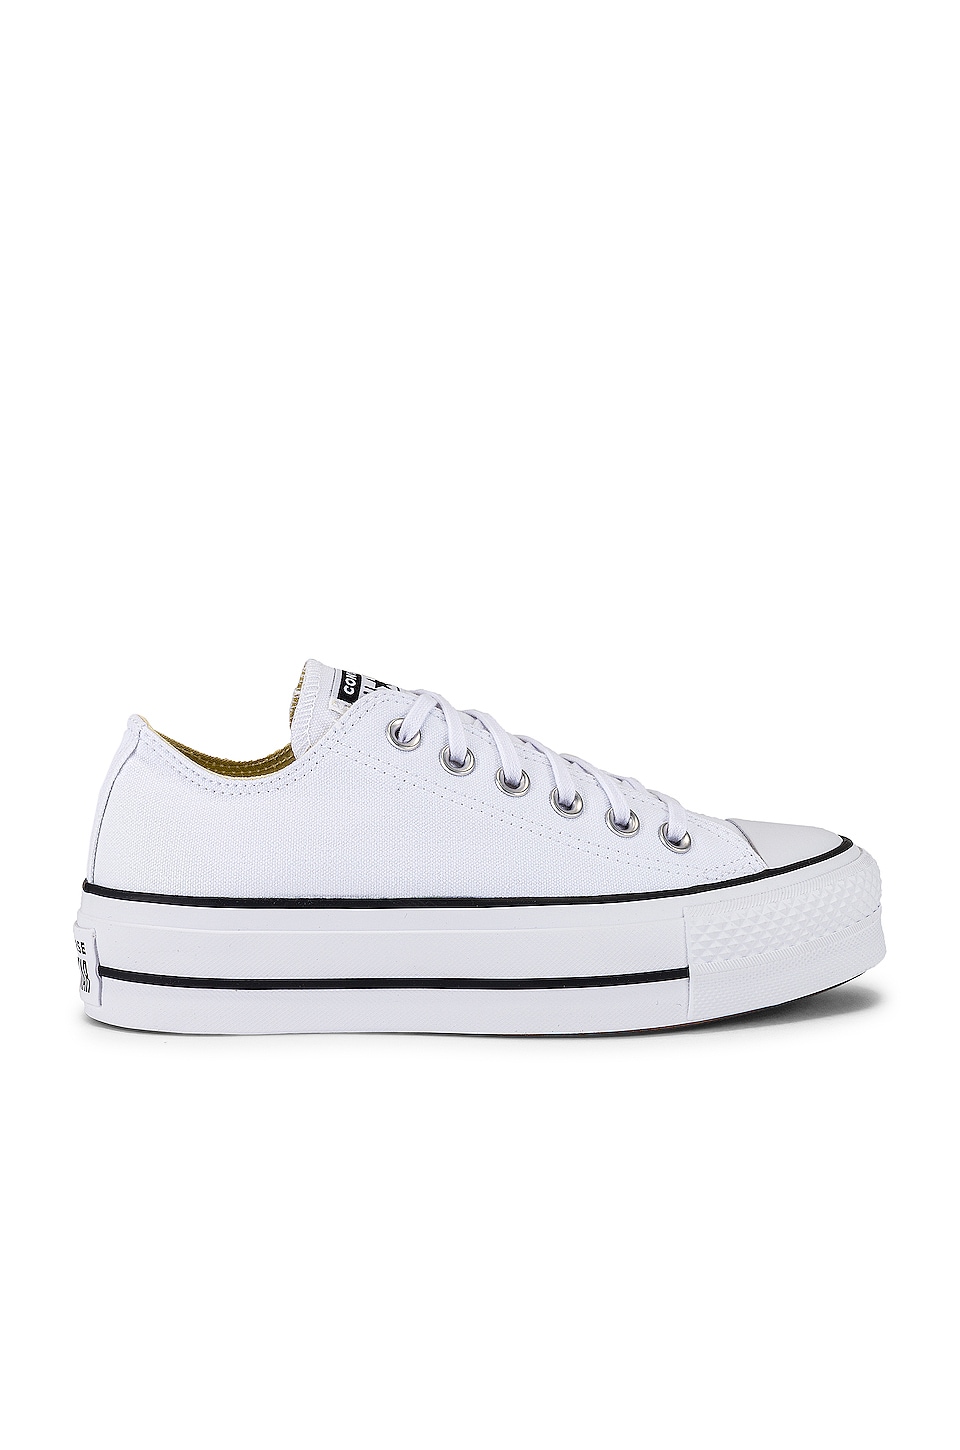 Converse Chuck Taylor All Star Lift Ox White